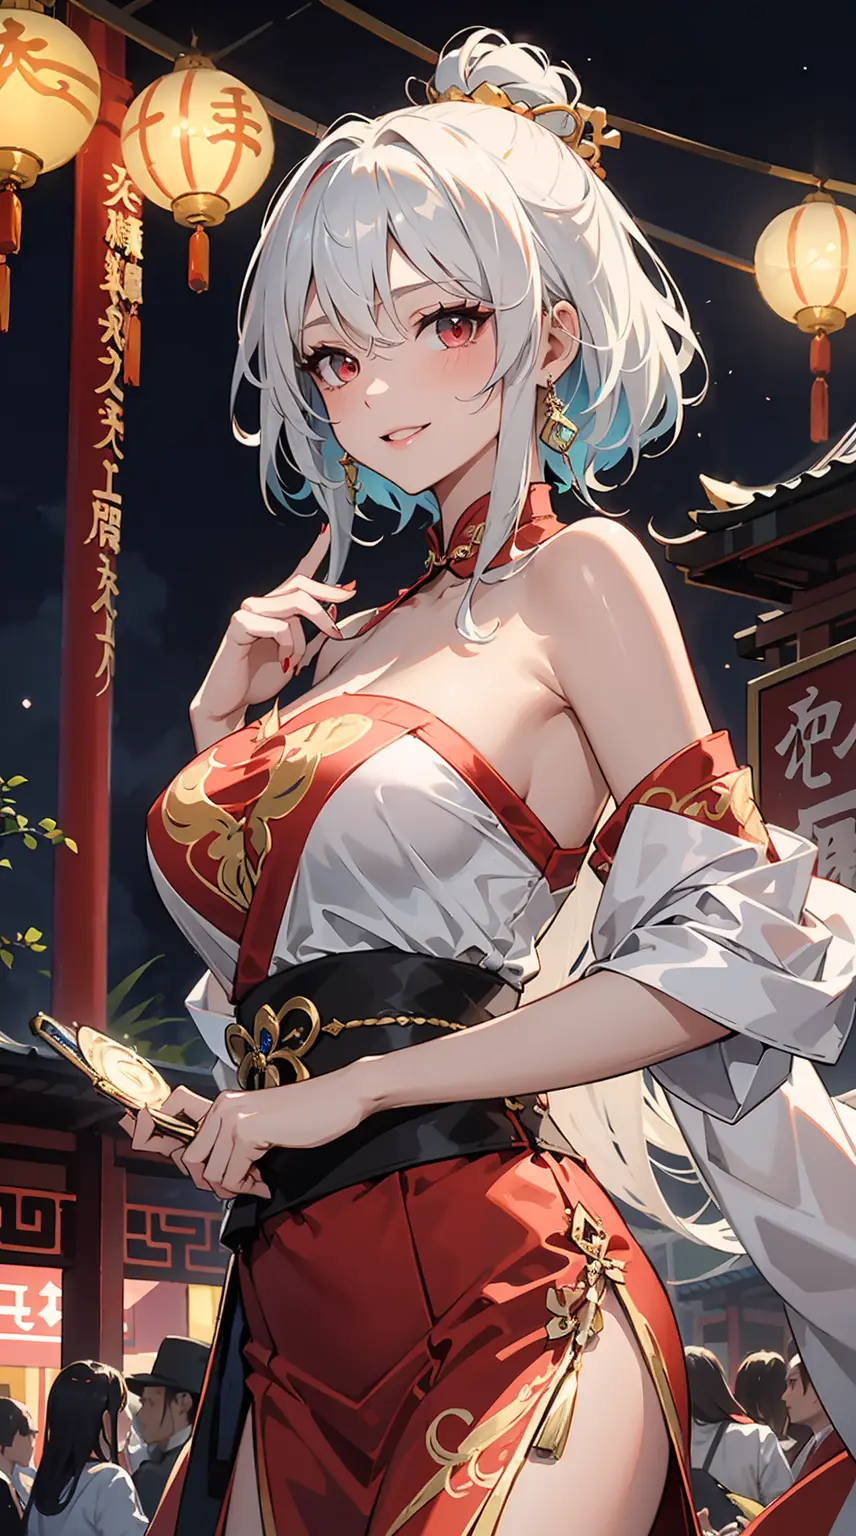 Roro Jonggrang is a legendary figure from Japanese folklore who is renowned for her exceptional beauty, alluring face and cute l...